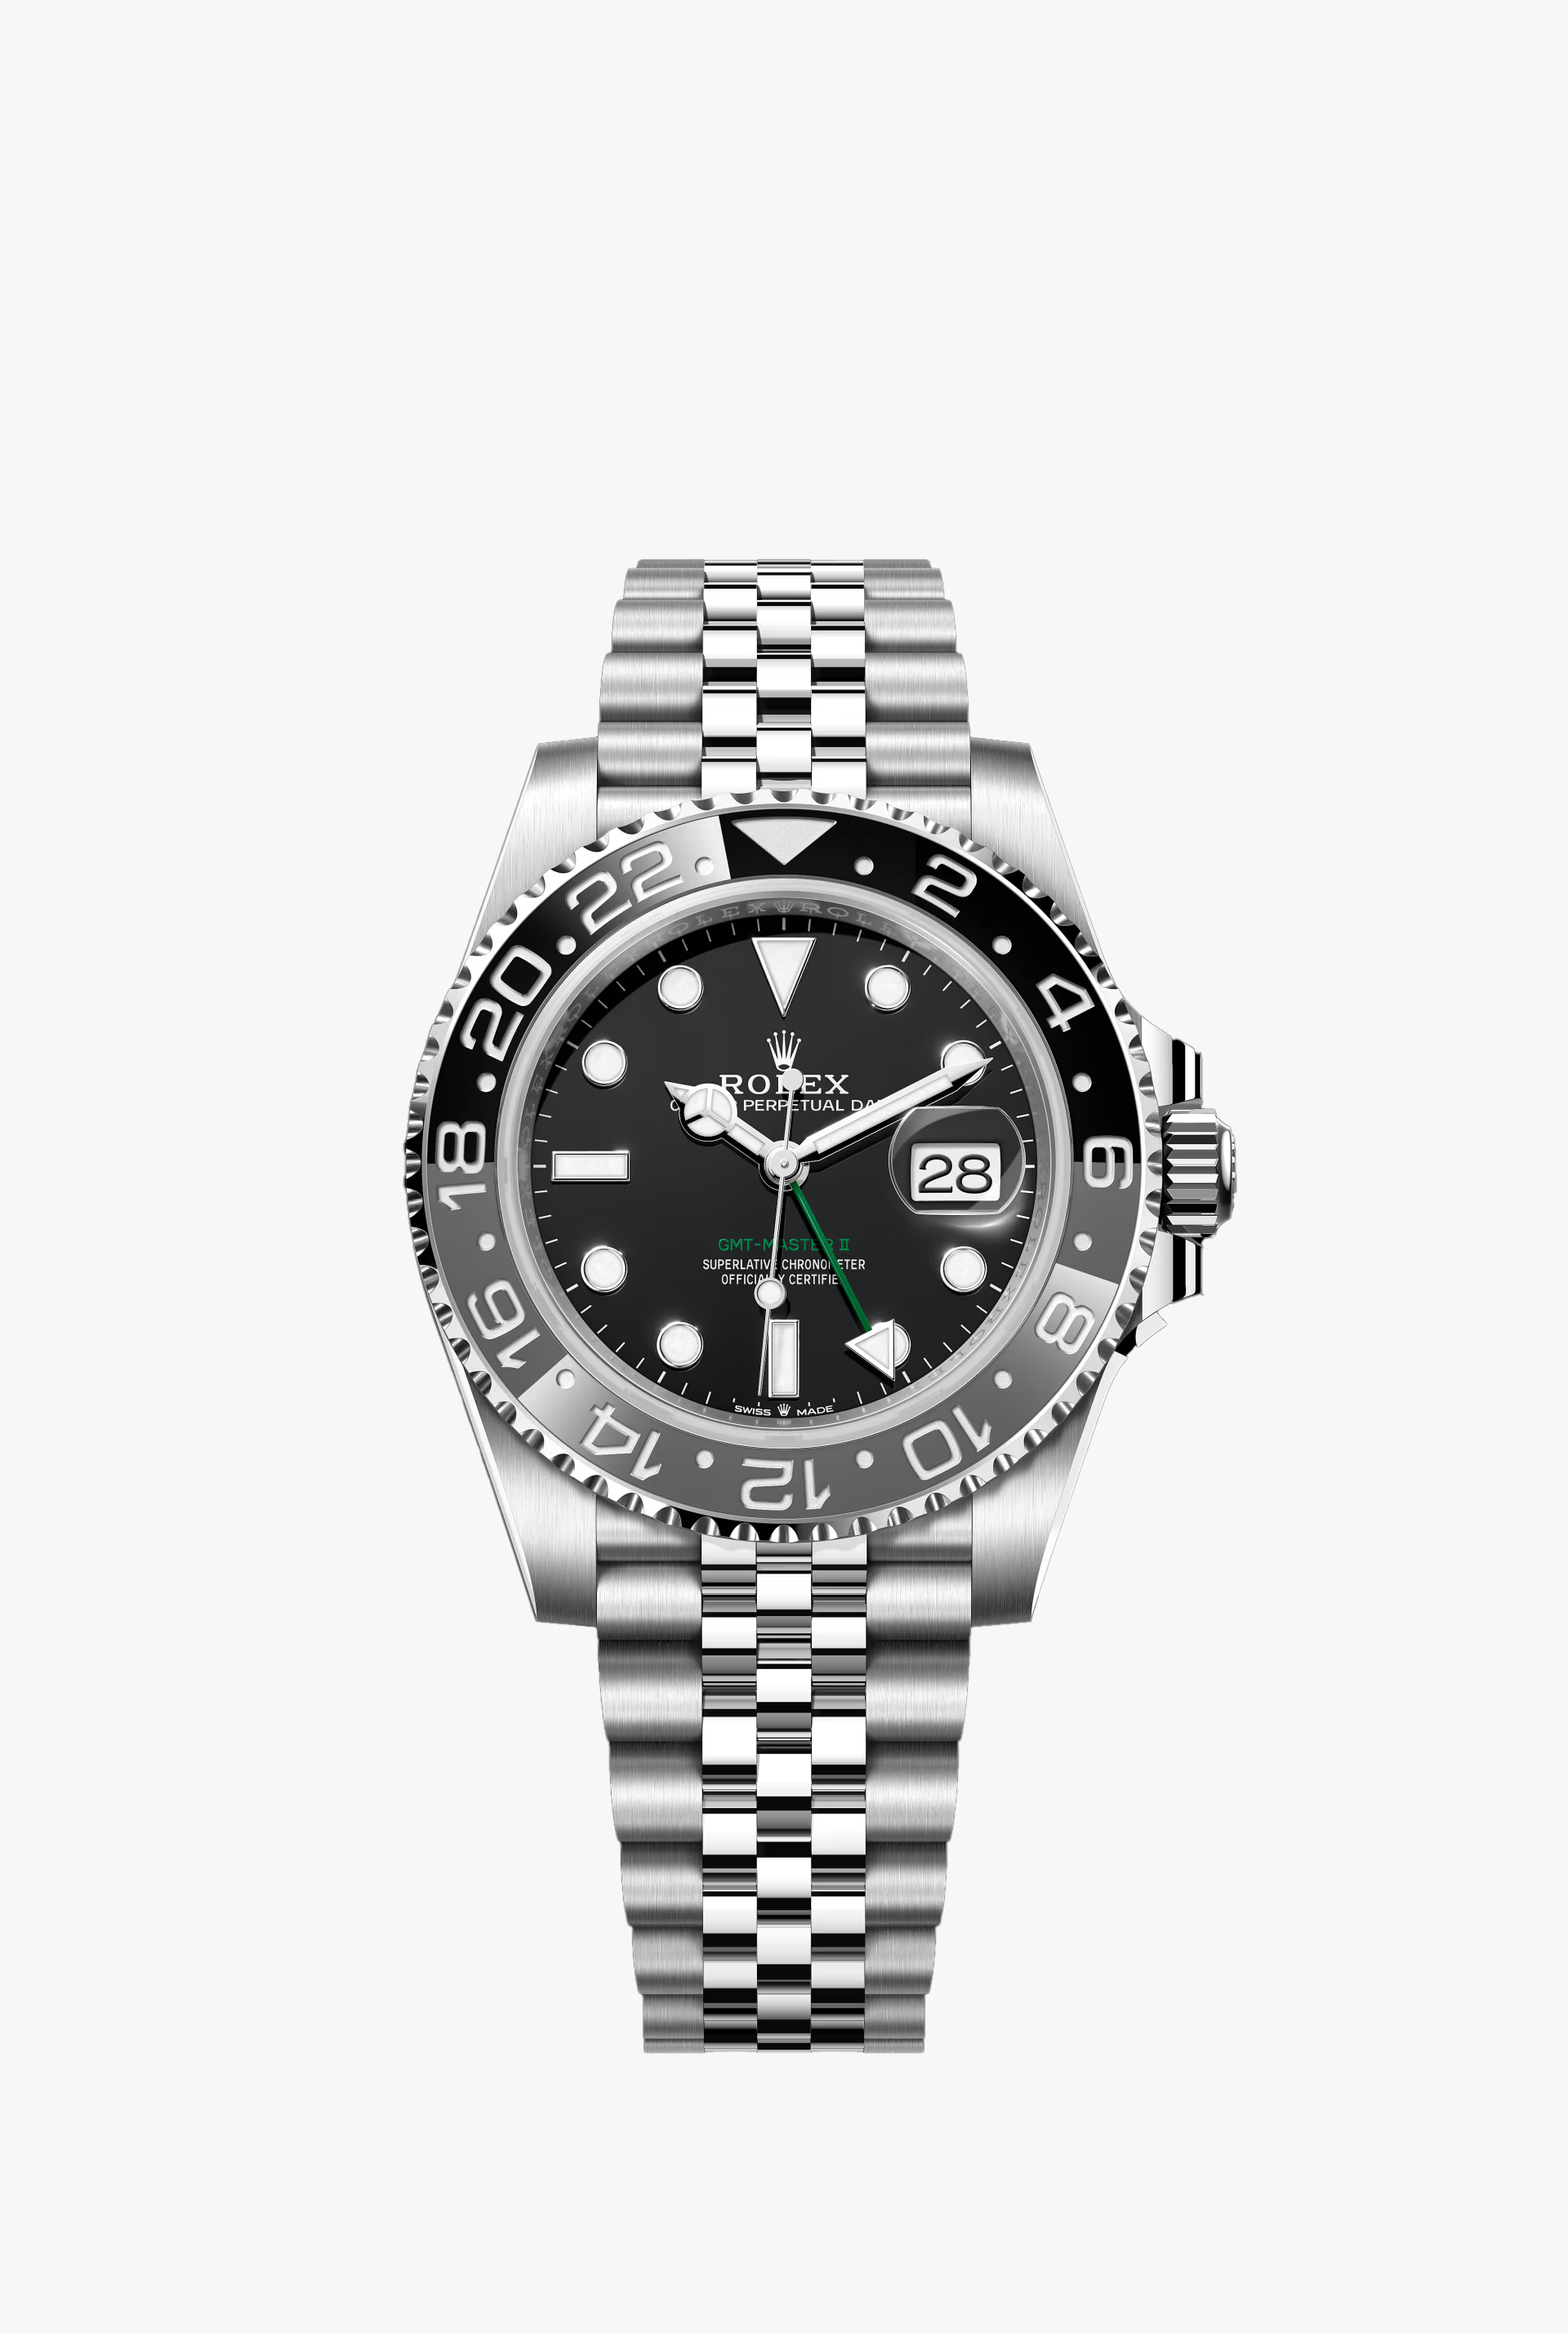 Rolex GMT-Masterl Oyster, 40 mm, OystersteelReference 126710GRNR